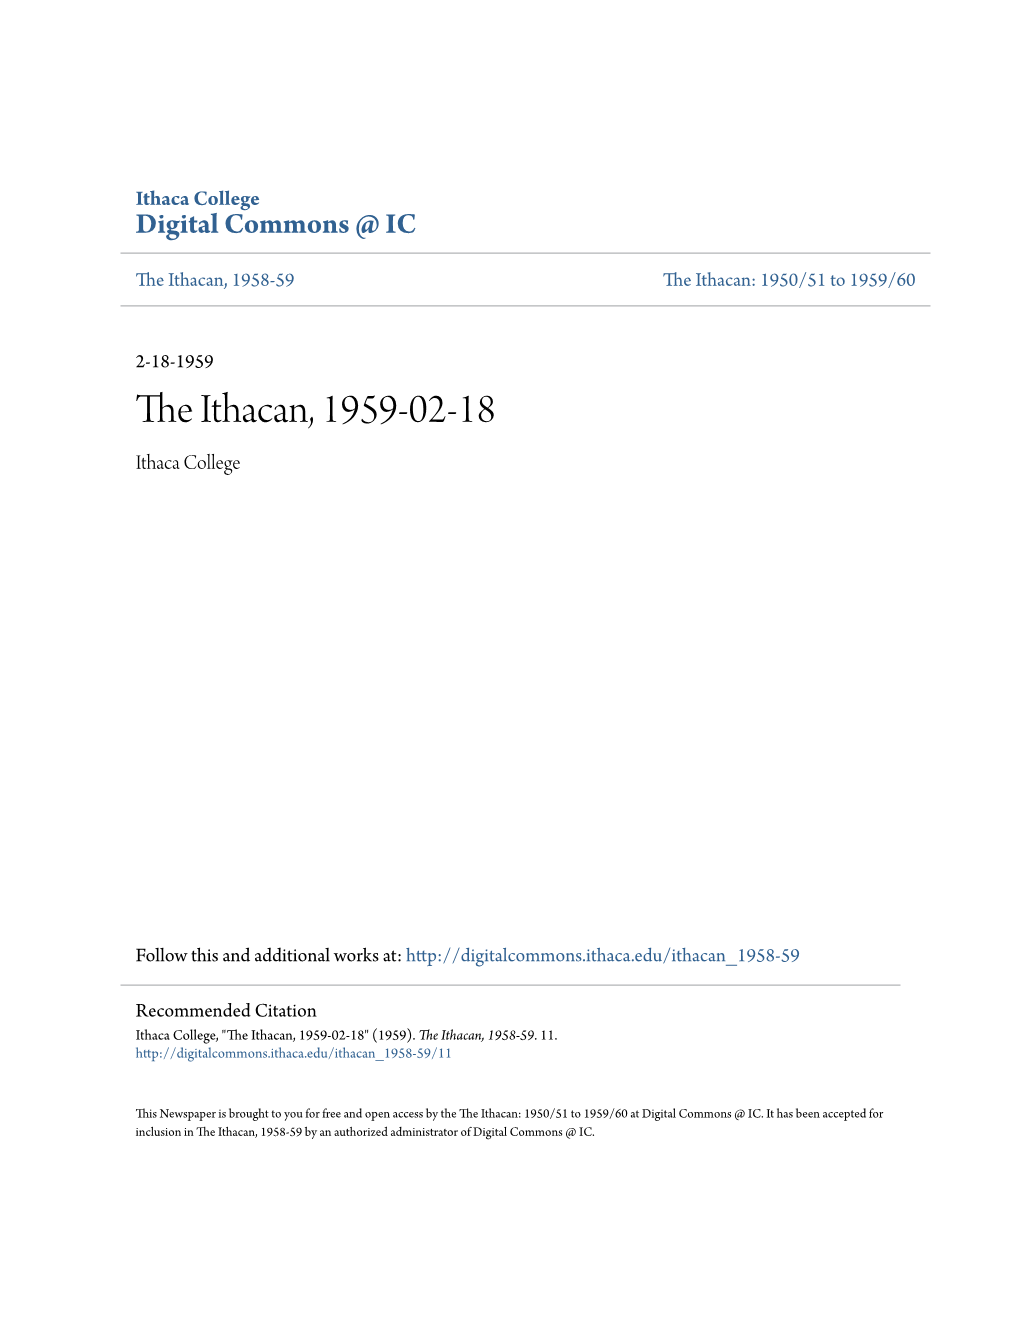 The Ithacan, 1959-02-18